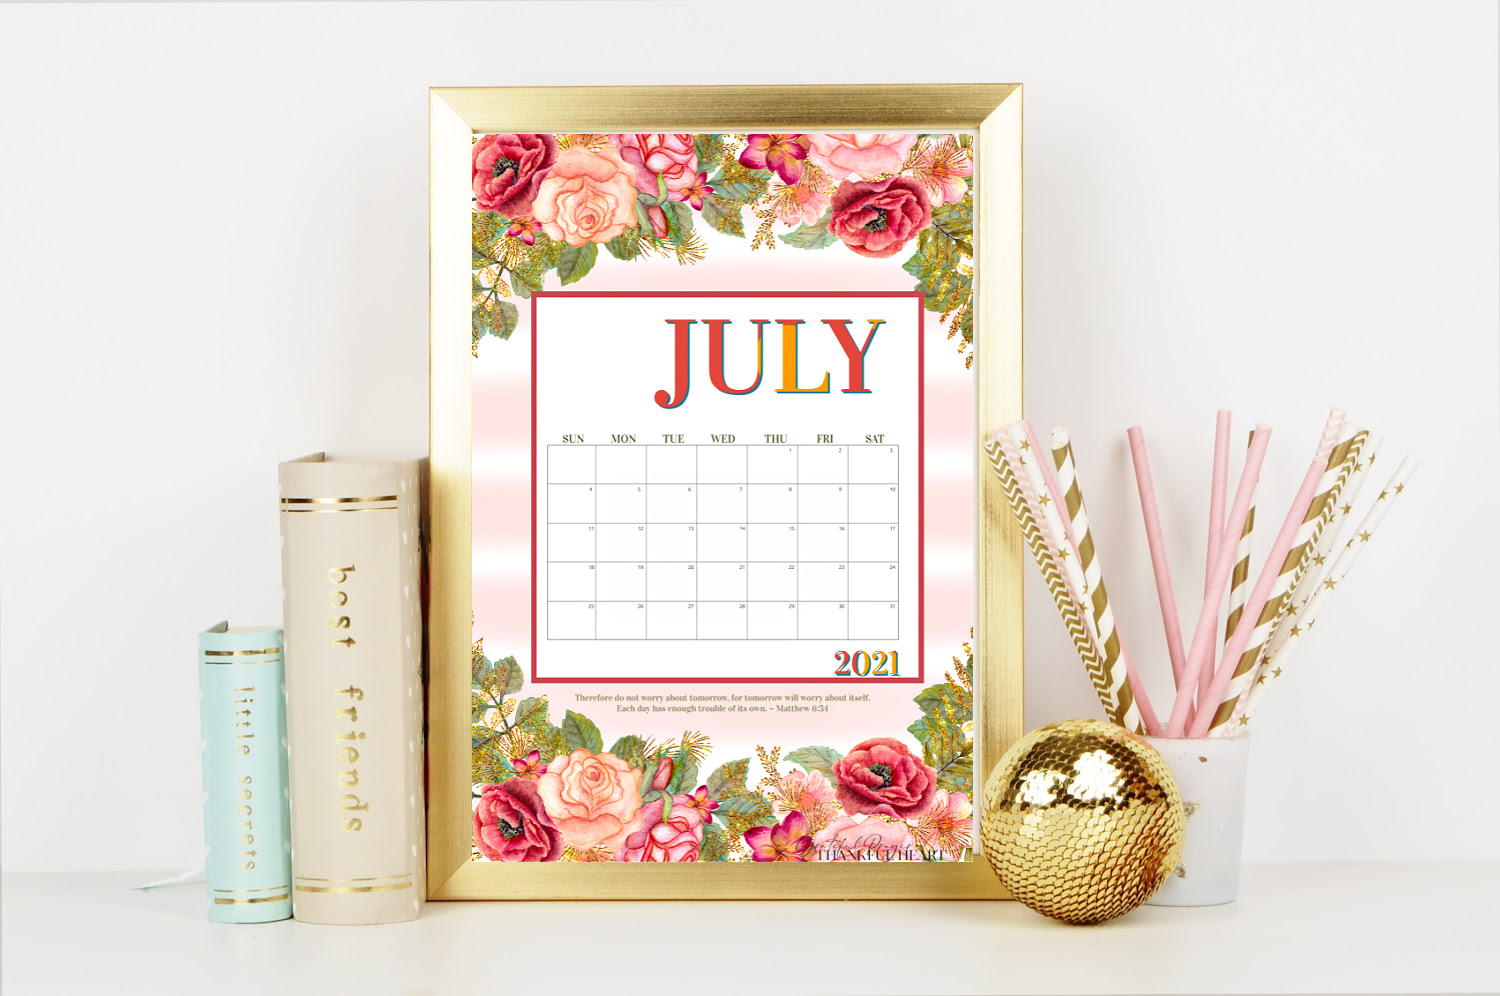 FREE July Calendar and weekly planner printables to keep you organized this summer. Pretty rose blossoms help welcome the month of July. A 2021 and blank version to use year after year. 